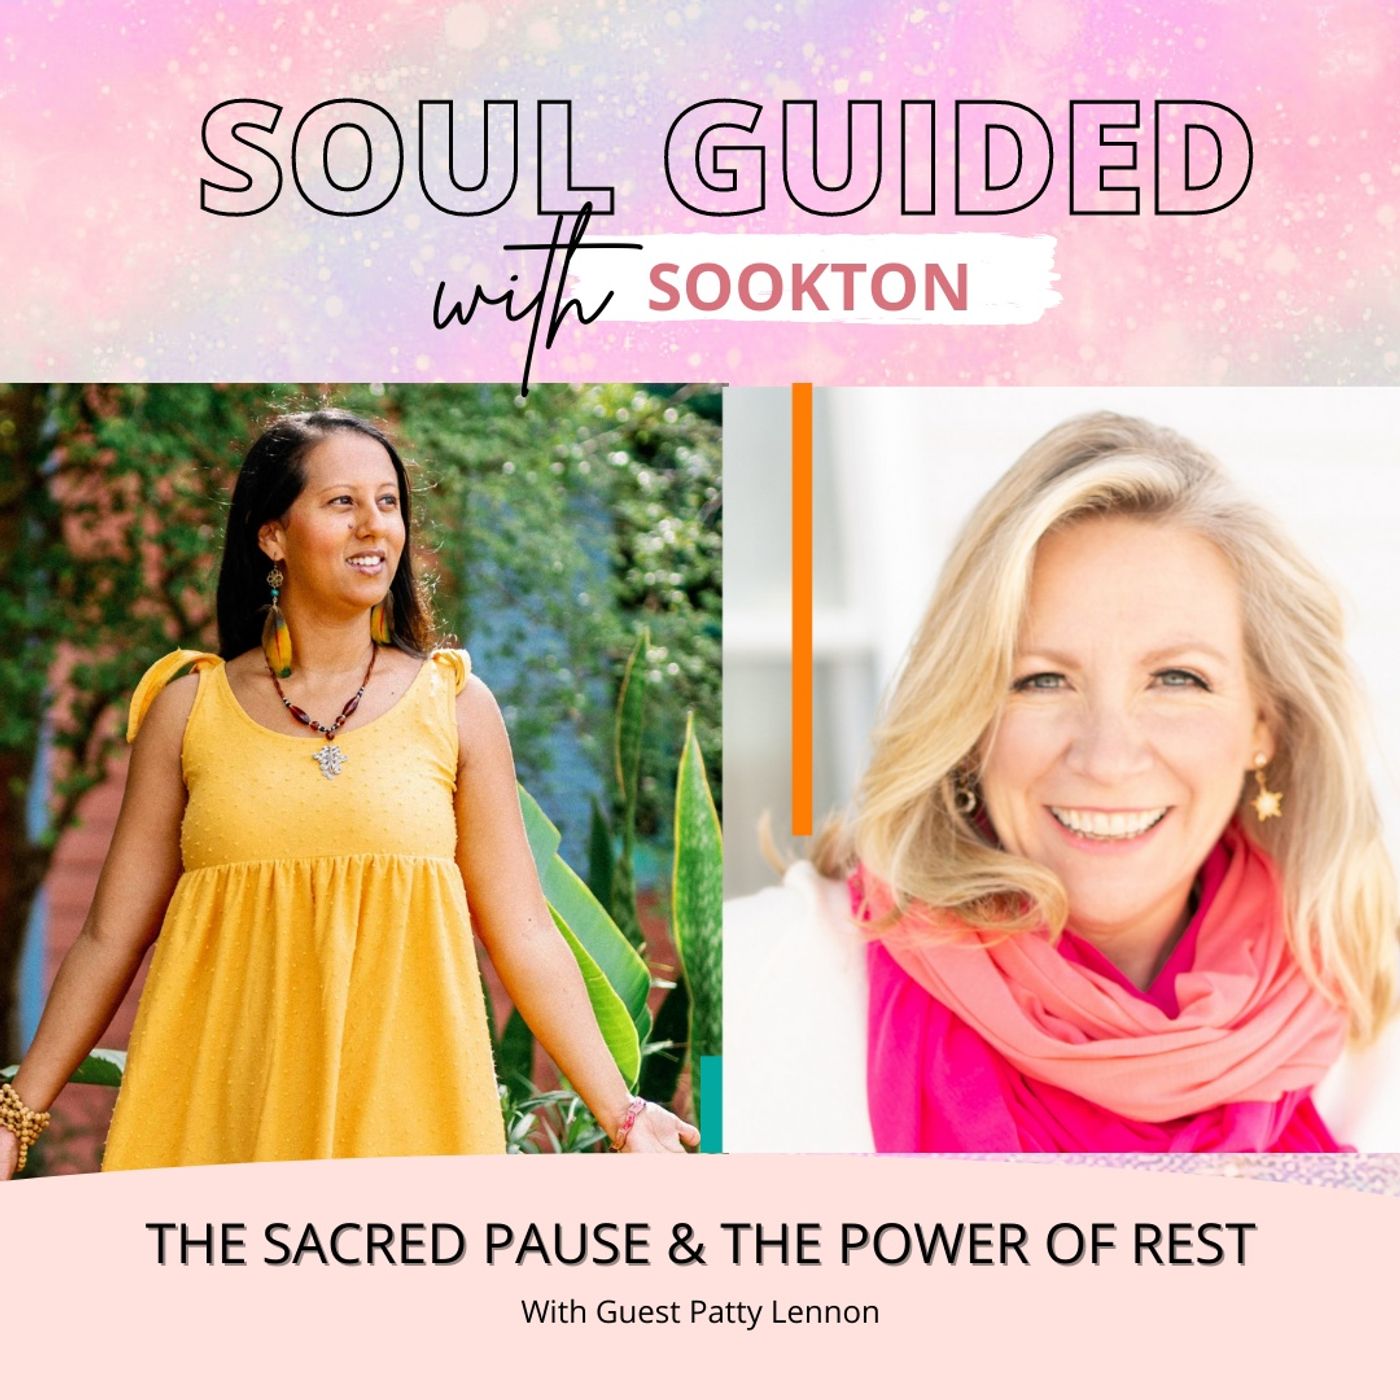 The Sacred Pause & The Power of Rest